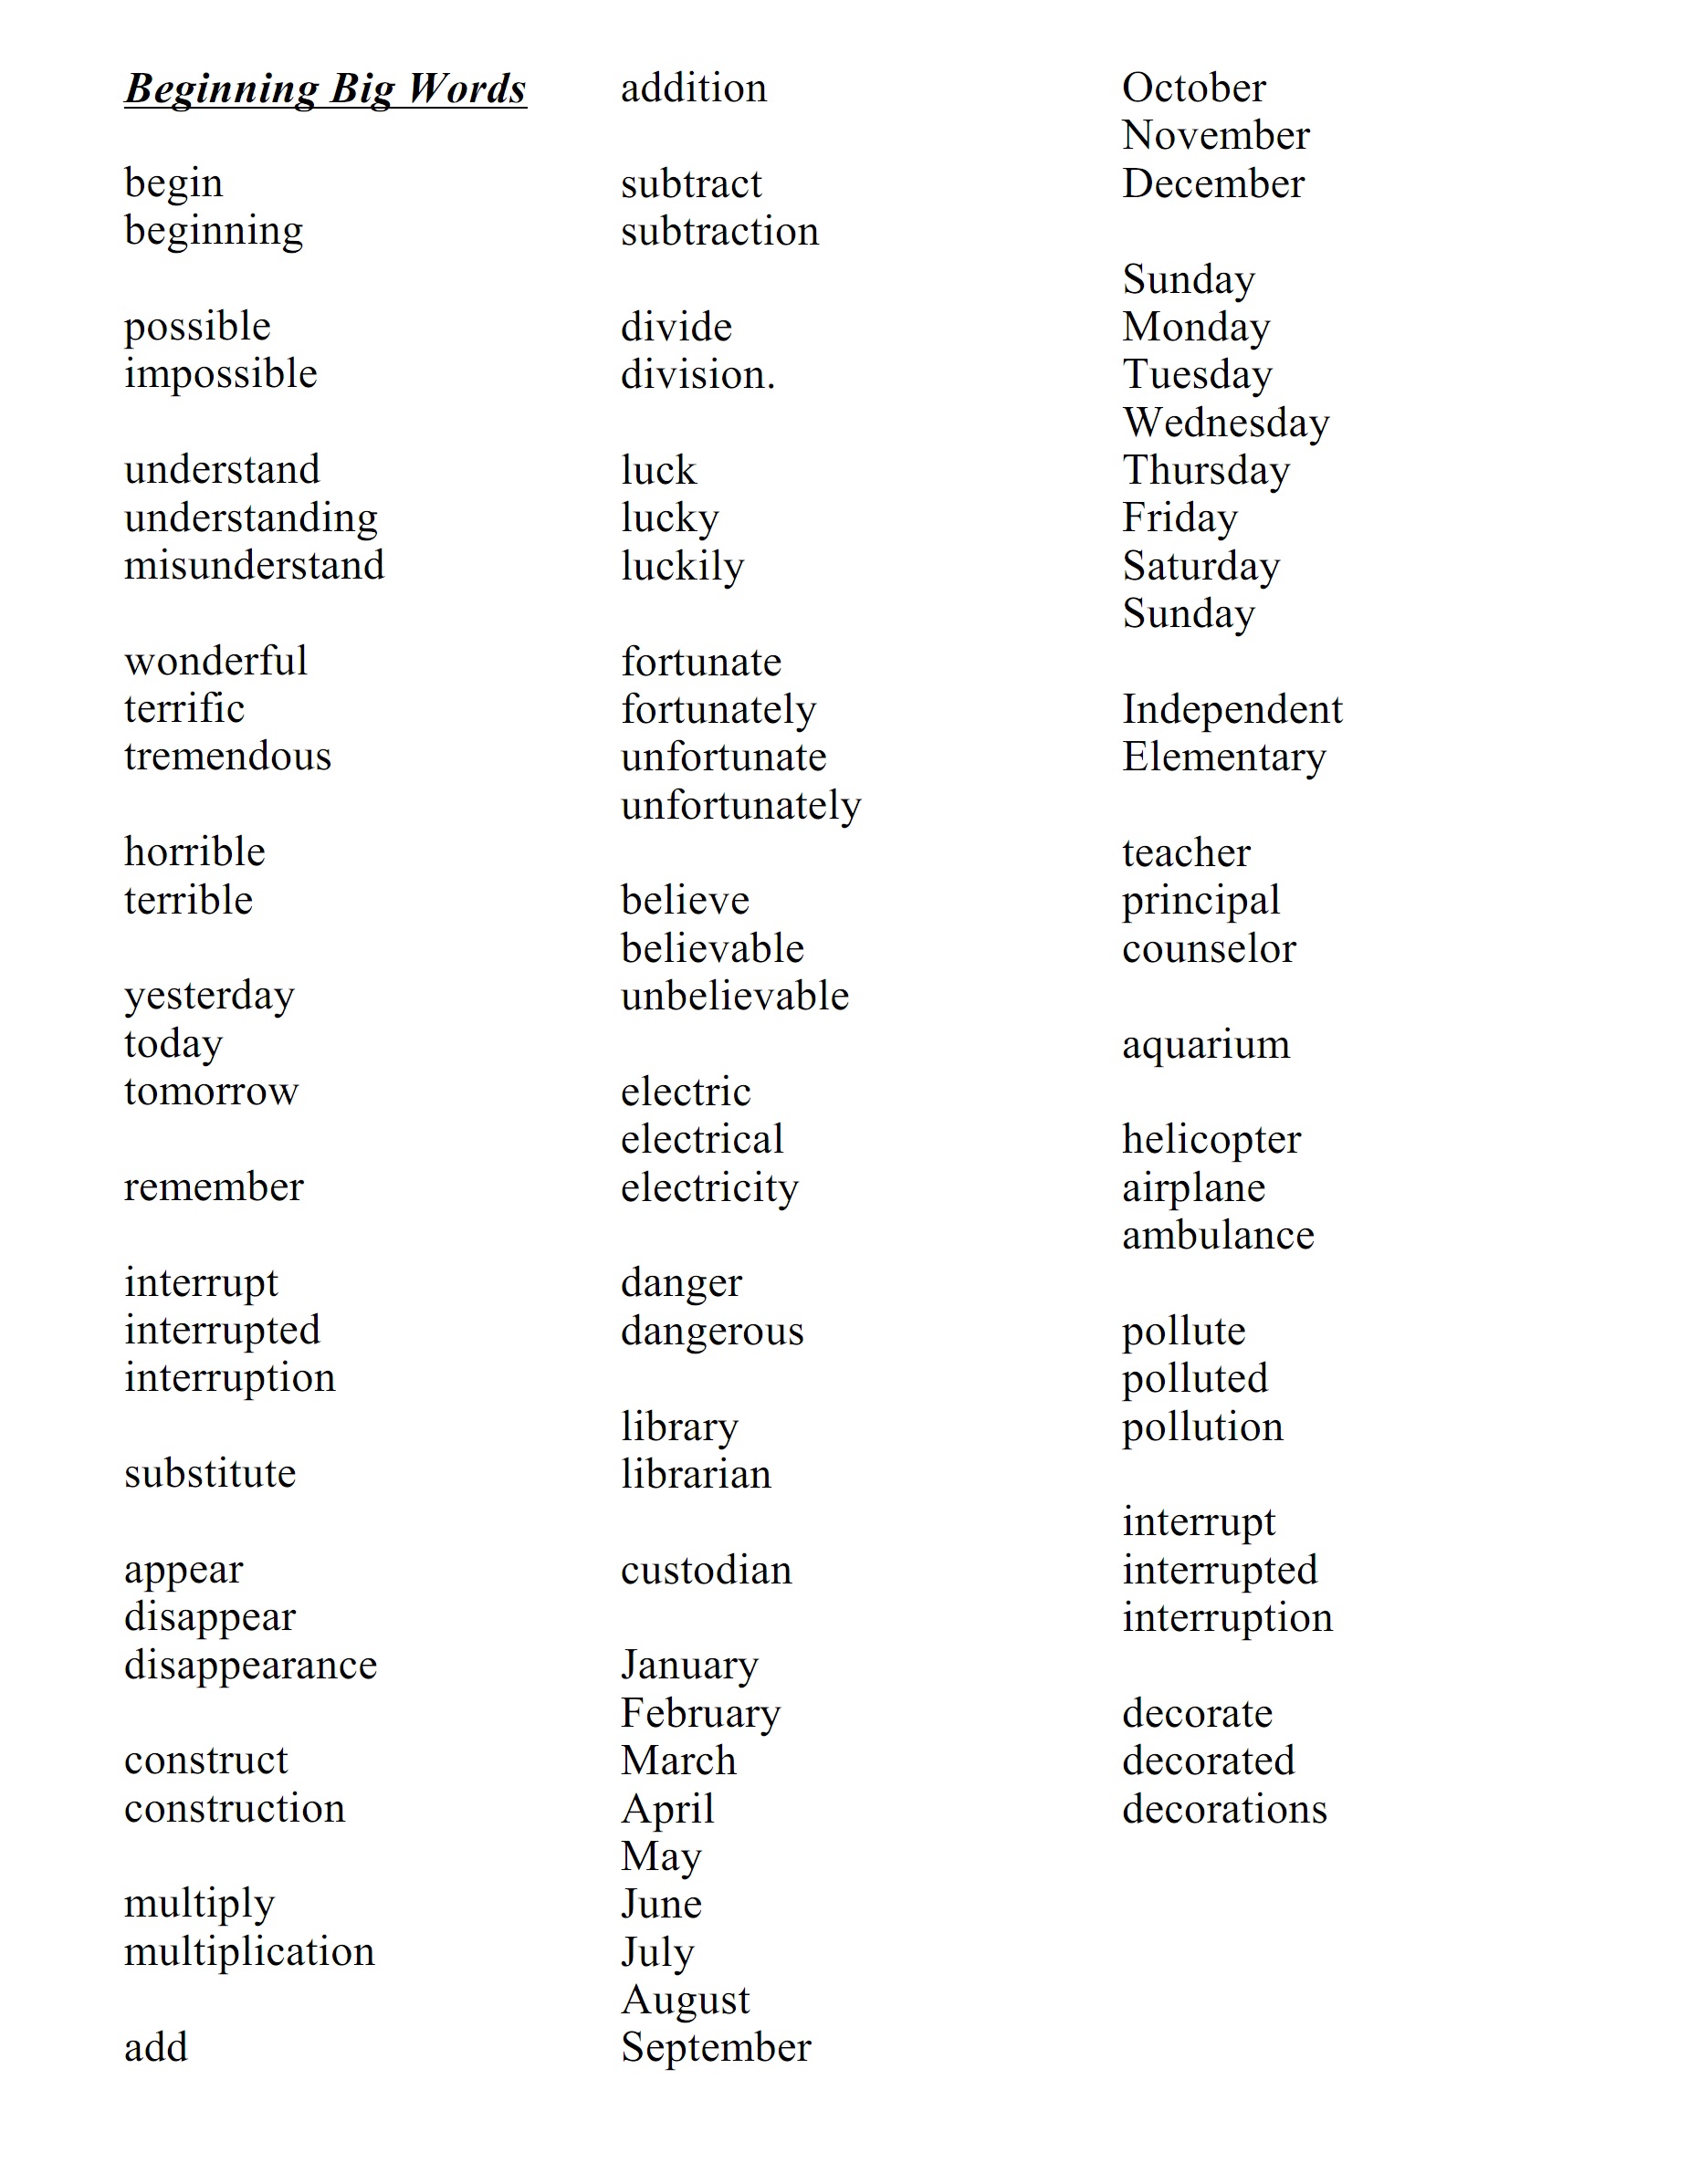 some big words to use in essays